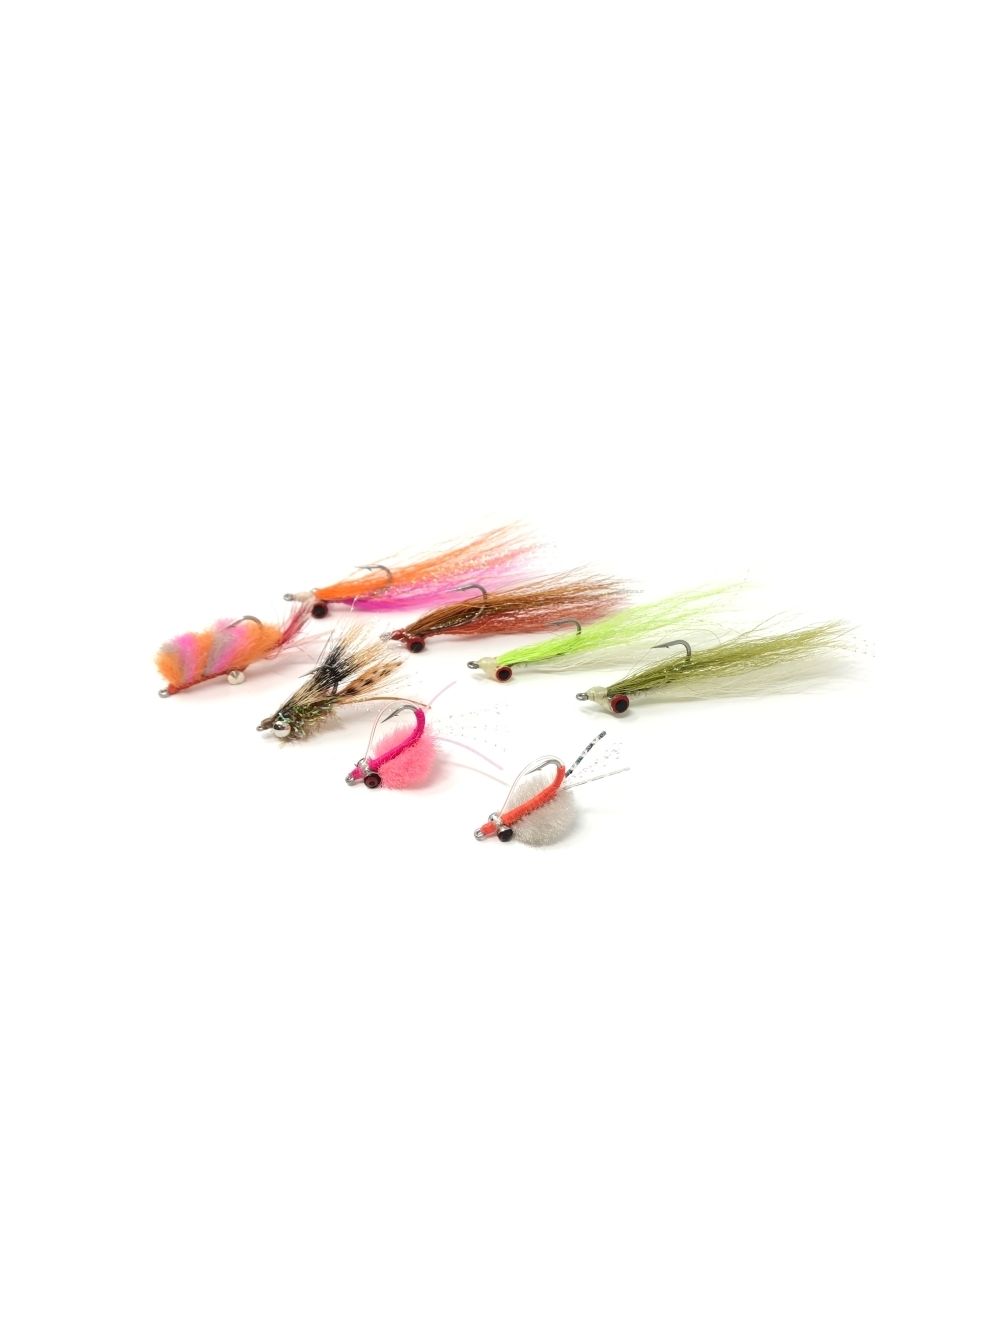  Saltwater Fly Fishing Flies Assortment Kit with Fly Box,  Deceiver, Clouser, Crab, Candyman, Shrimp - 10 Piece : Sports & Outdoors